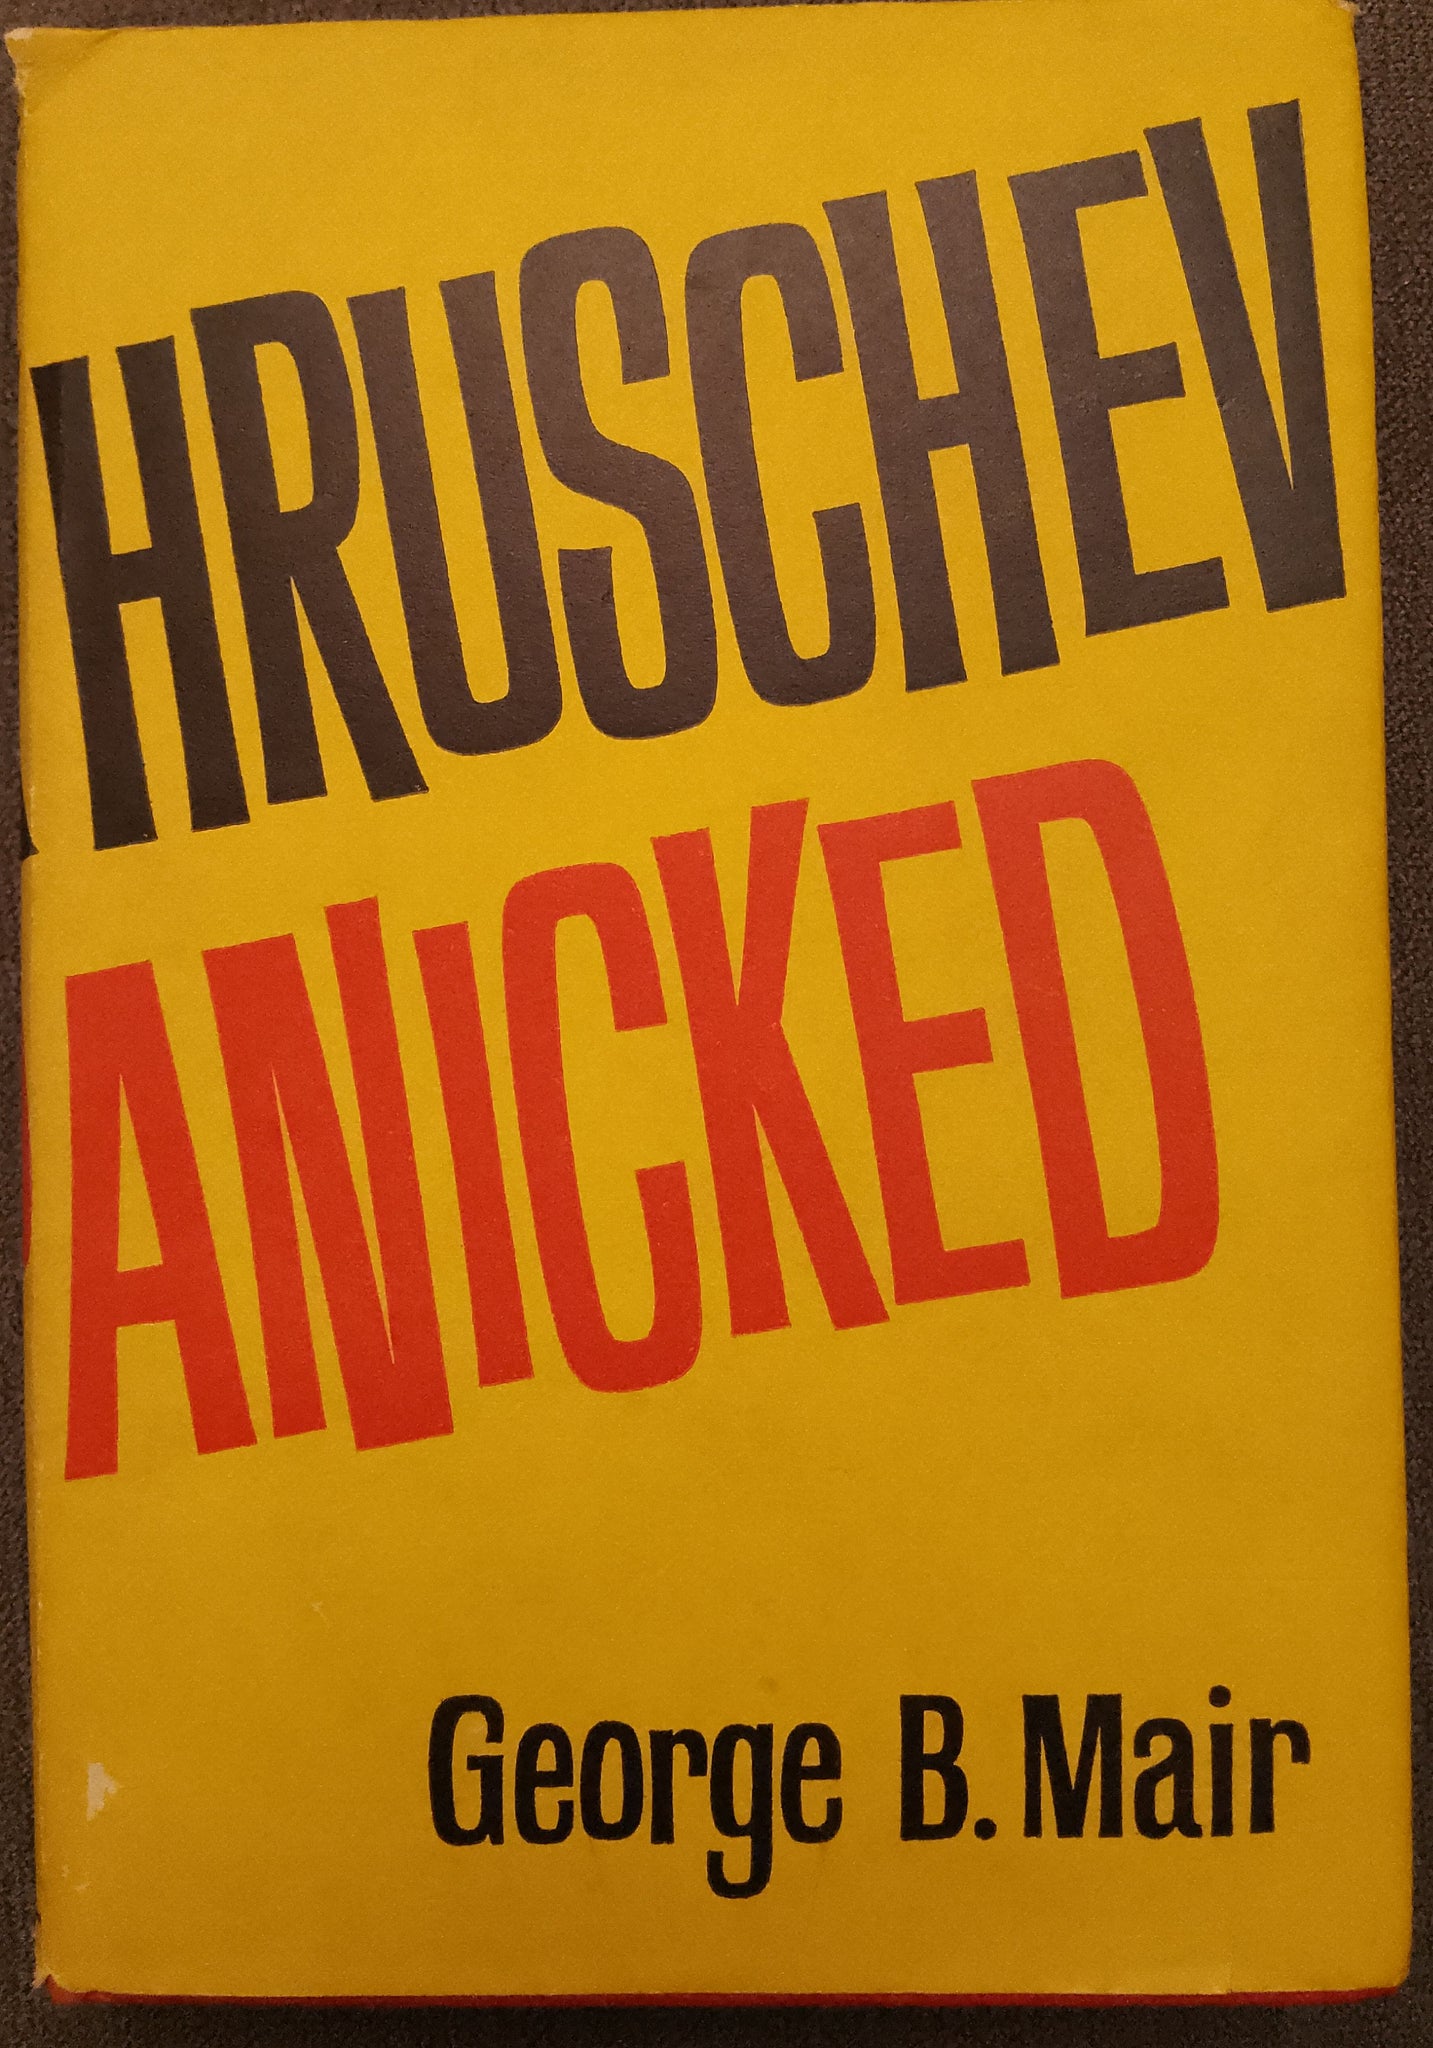 The Day Khruschev Panicked by George B. Mair